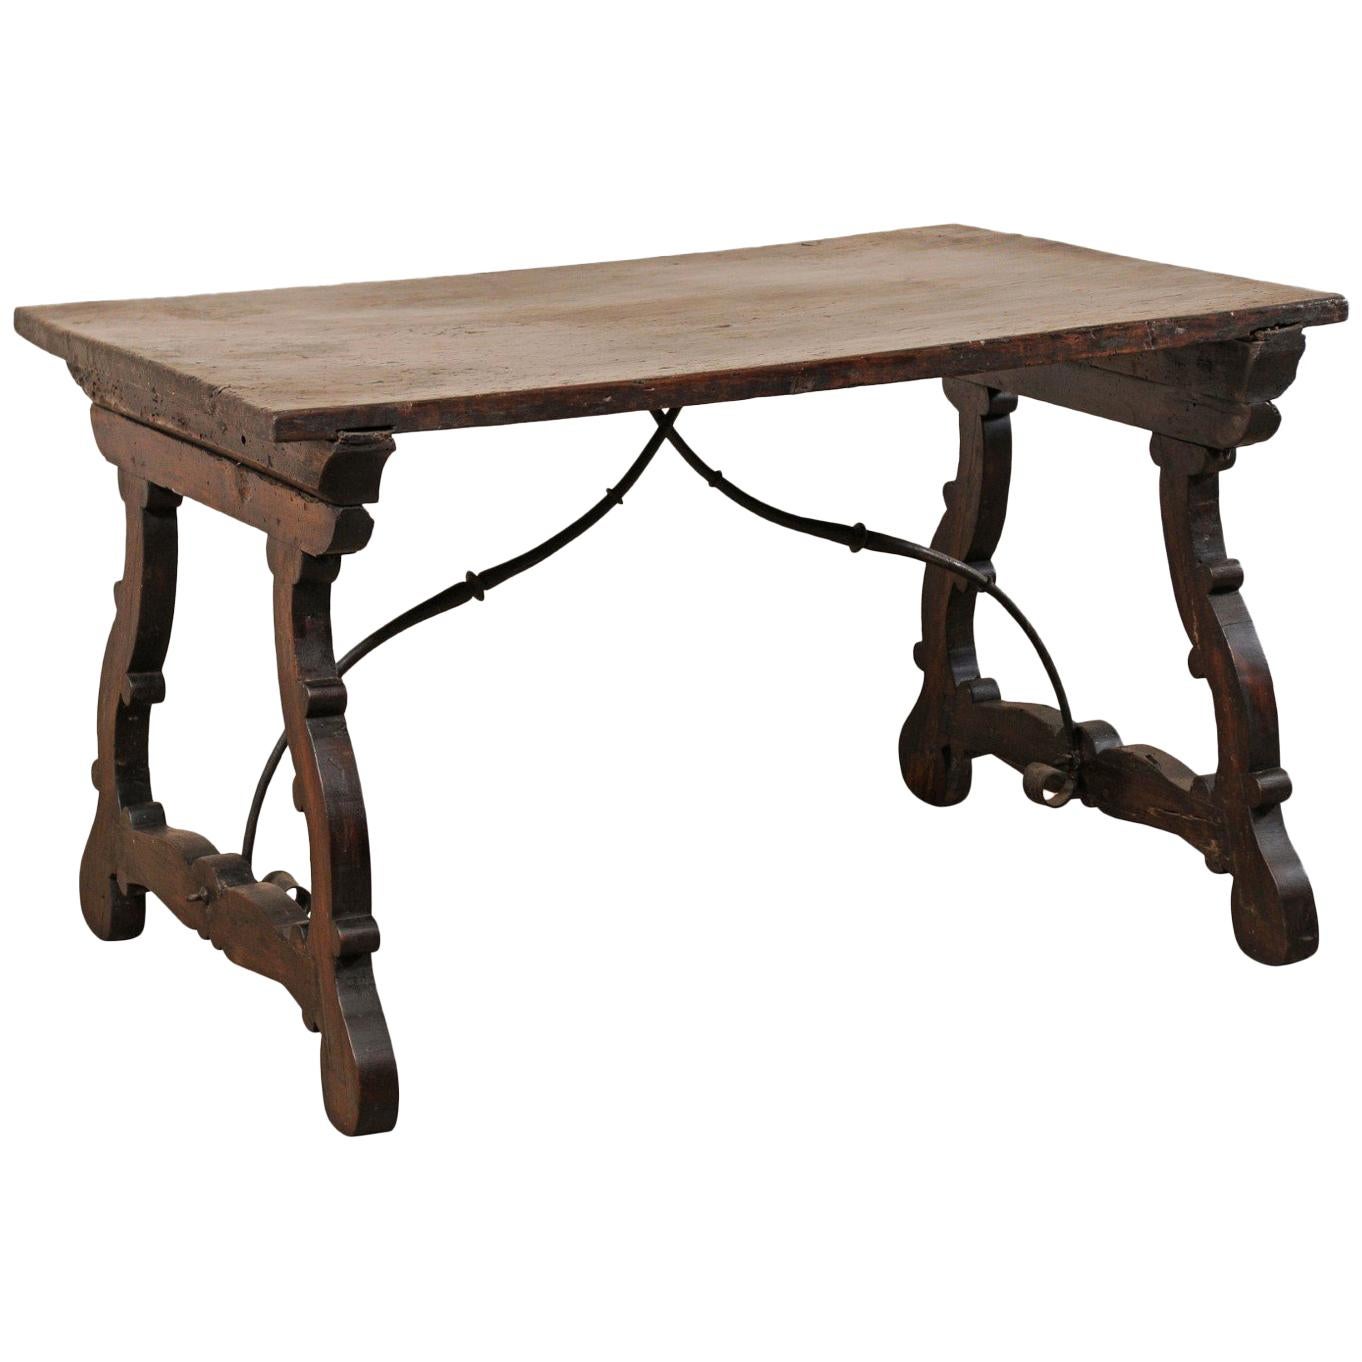 An 18th Century Walnut Wood Trestle Table with Arched Iron Stretcher from Italy